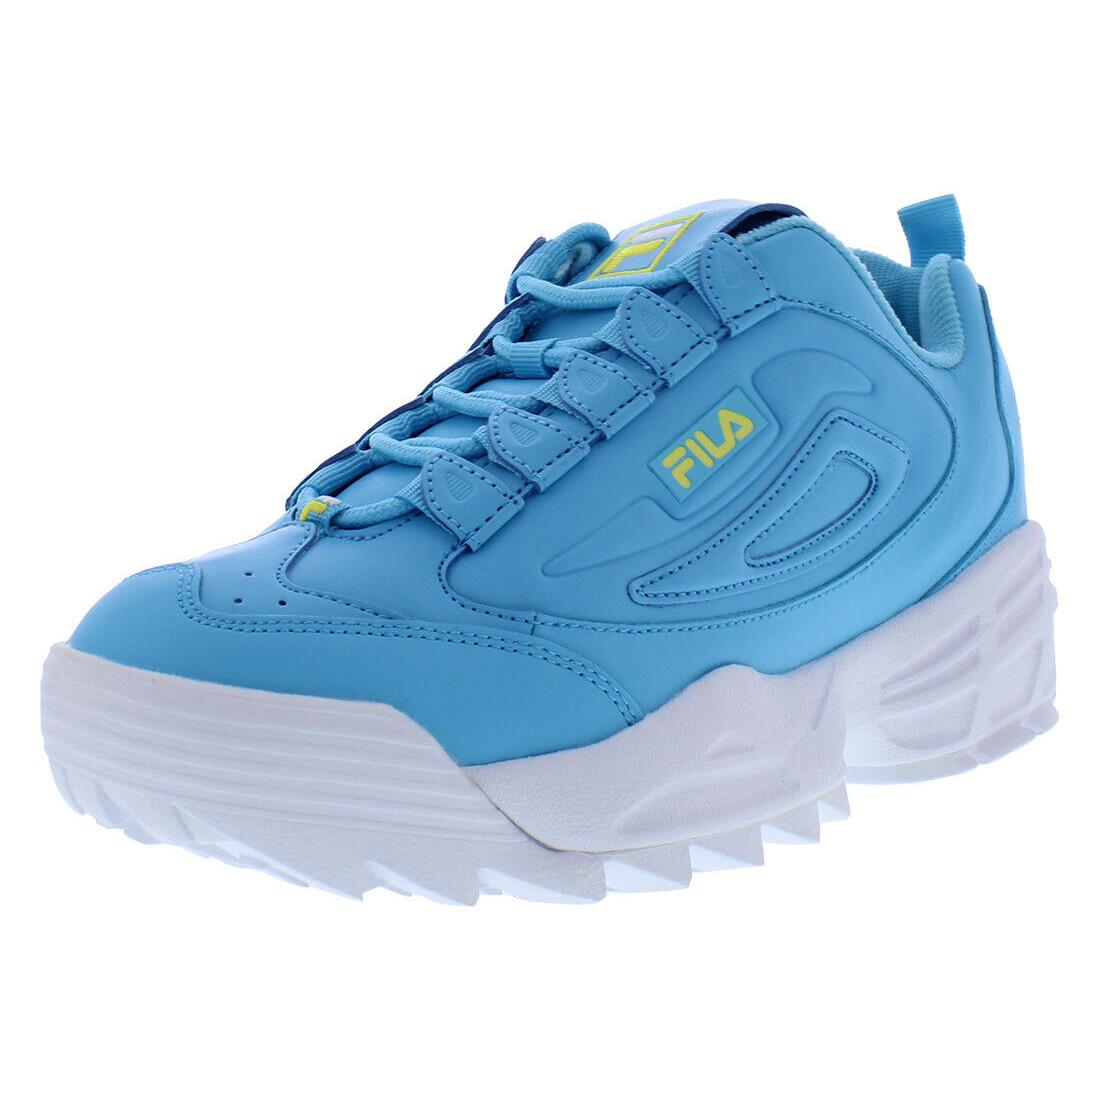 Fila Disruptor 3 Womens Shoes Size 8 Color: Bachelor Button/limelight/white